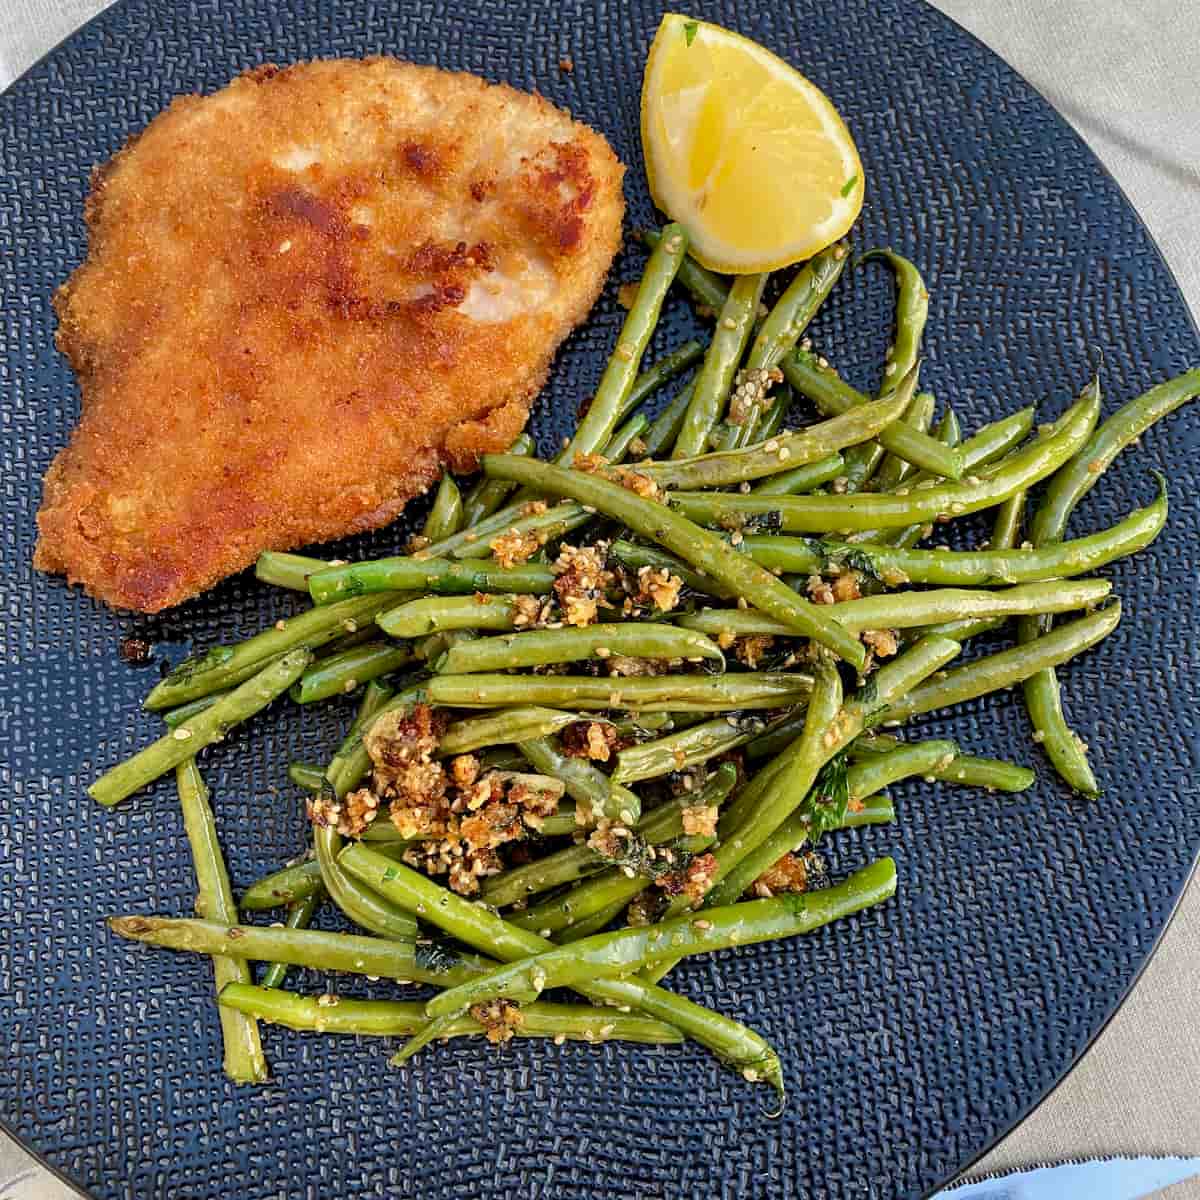 fried green or string beans in breadcrumbs, garlic, herbs and seeds in oil and butter with breaded turkey